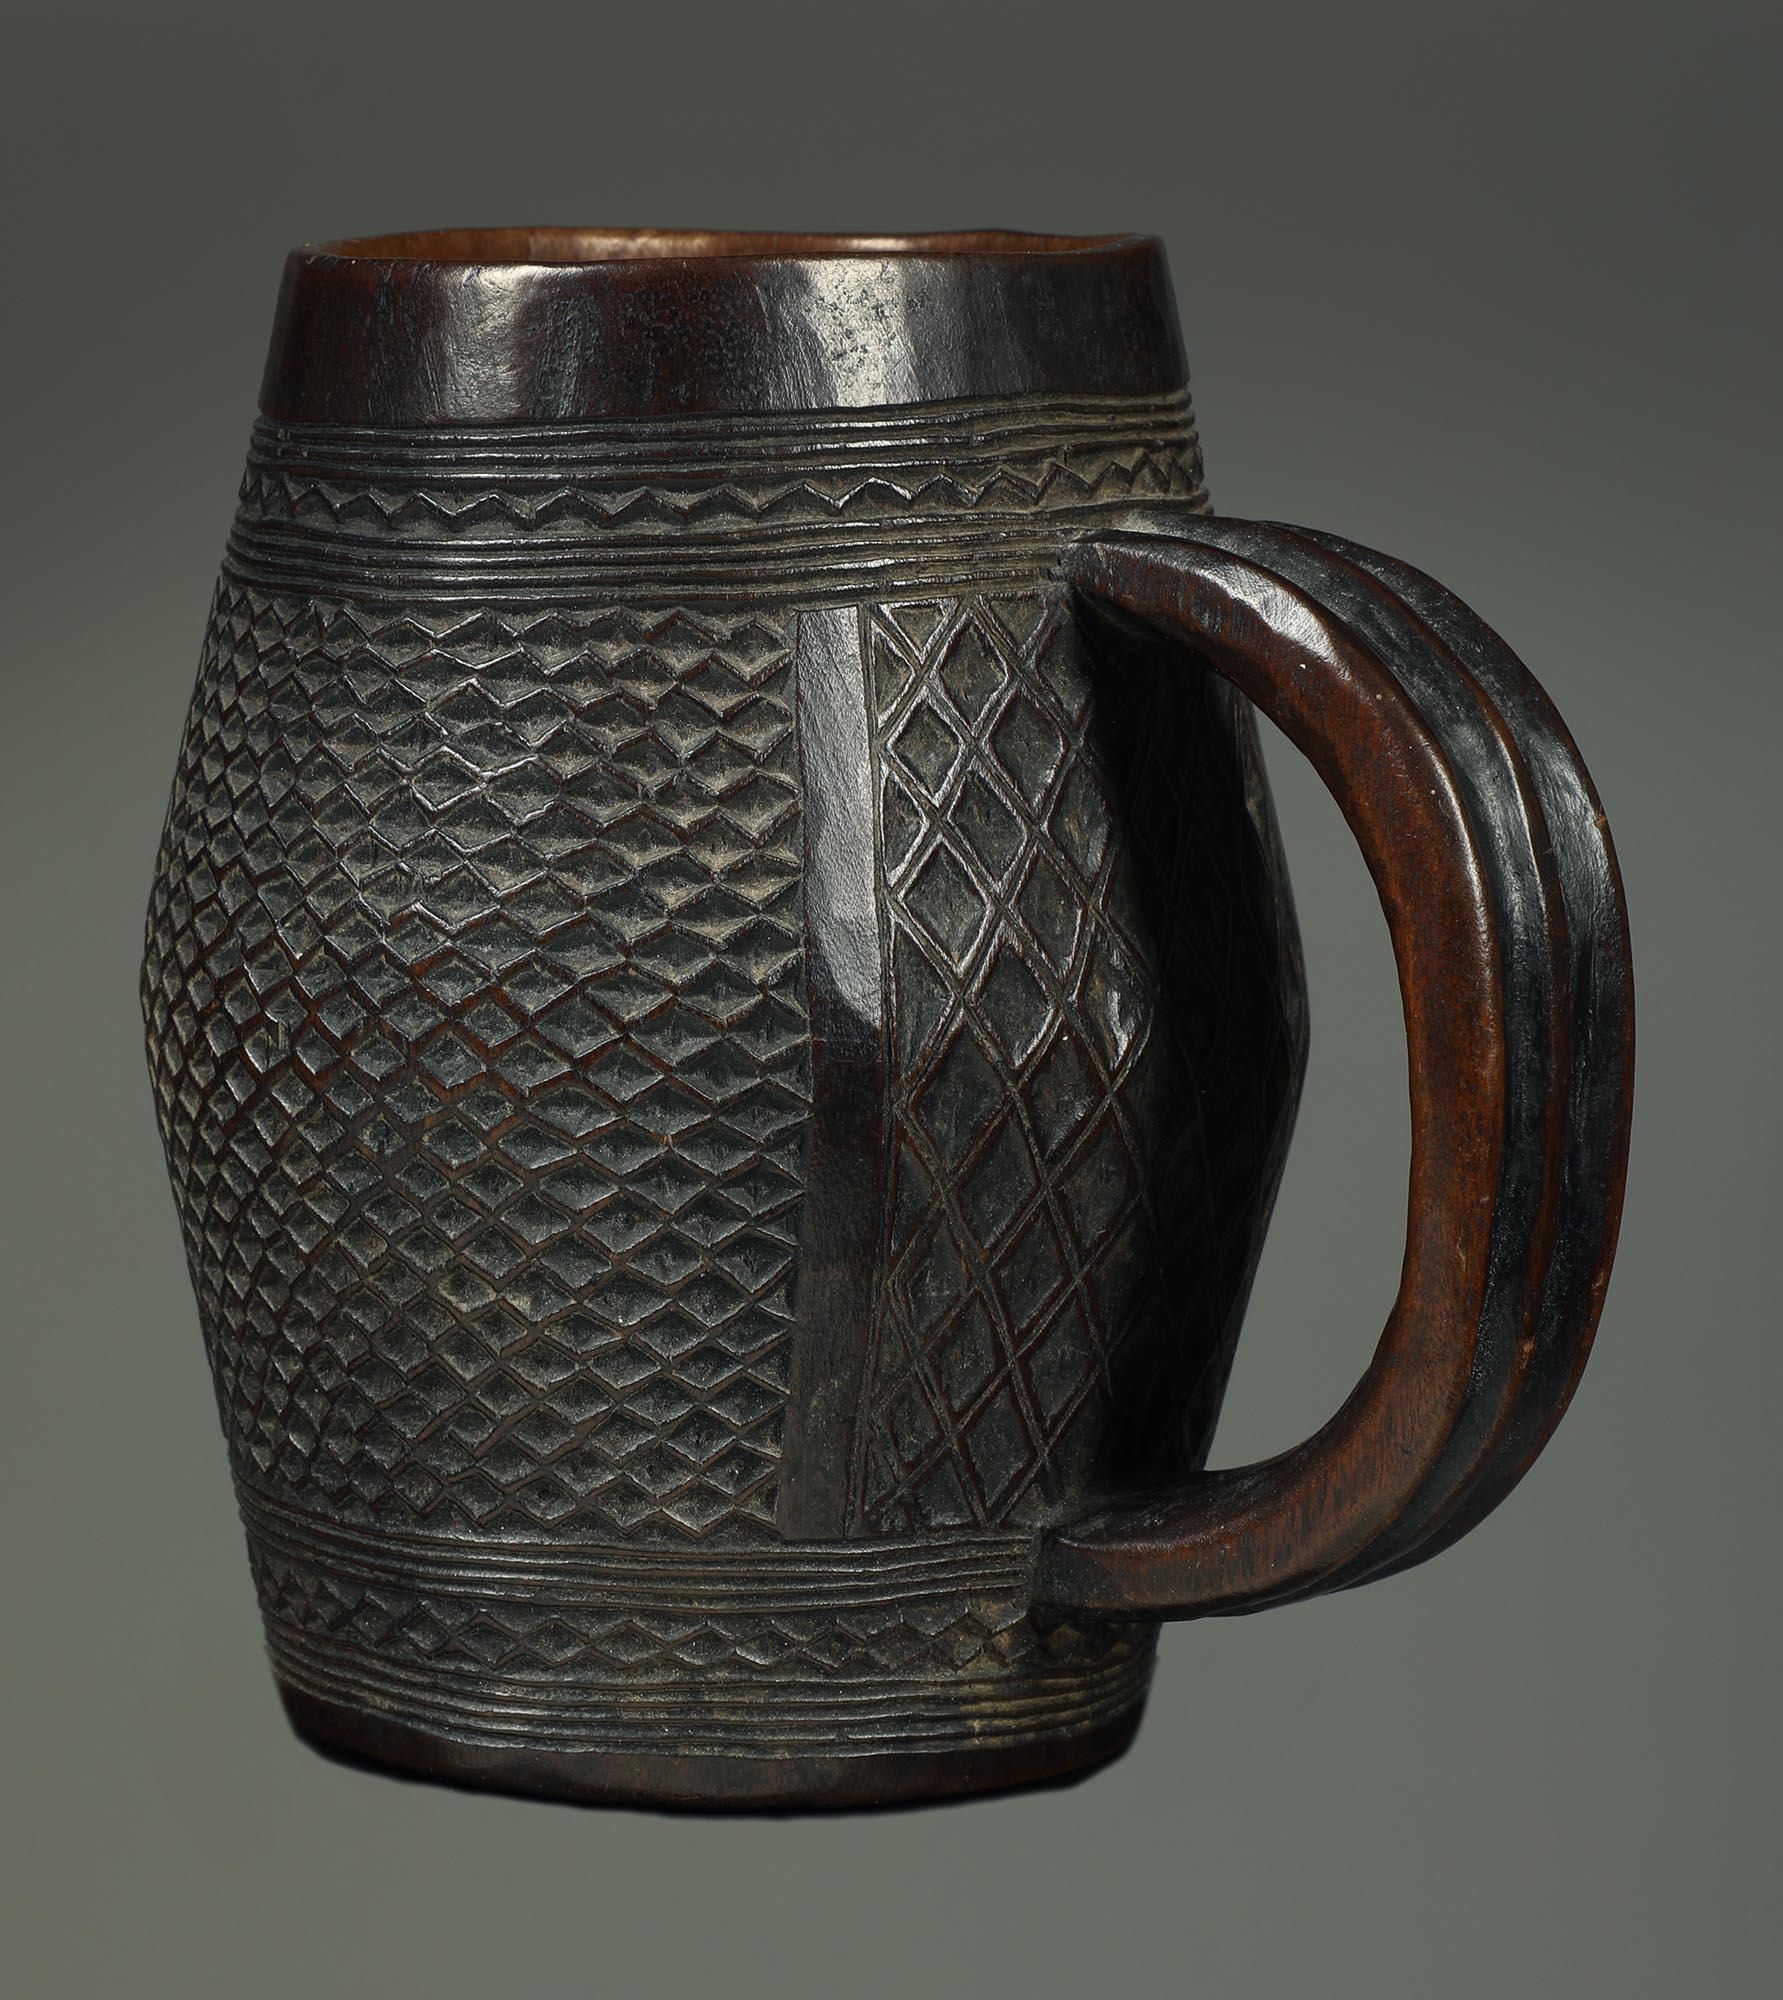 Wood Fine Kuba Cup with Incised Textile Designs, early 20th century Central Africa  For Sale